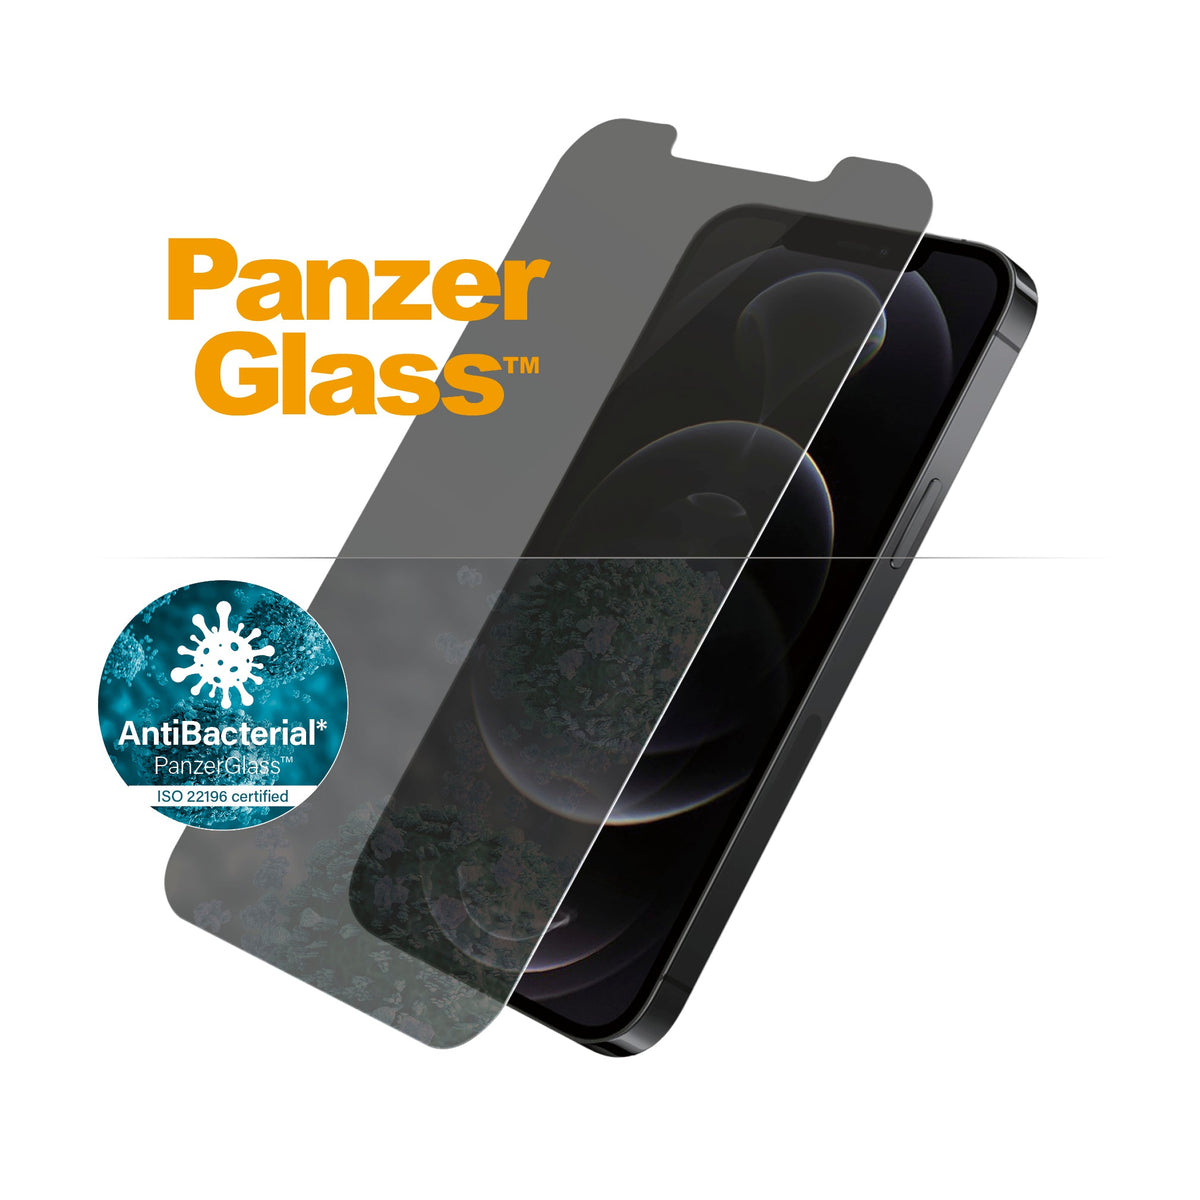 [OPEN BOX] PANZERGLASS iPhone 12/12 Pro - Standard Fit Tempered Glass Screen Protector w/ Anti-Microbial - Privacy